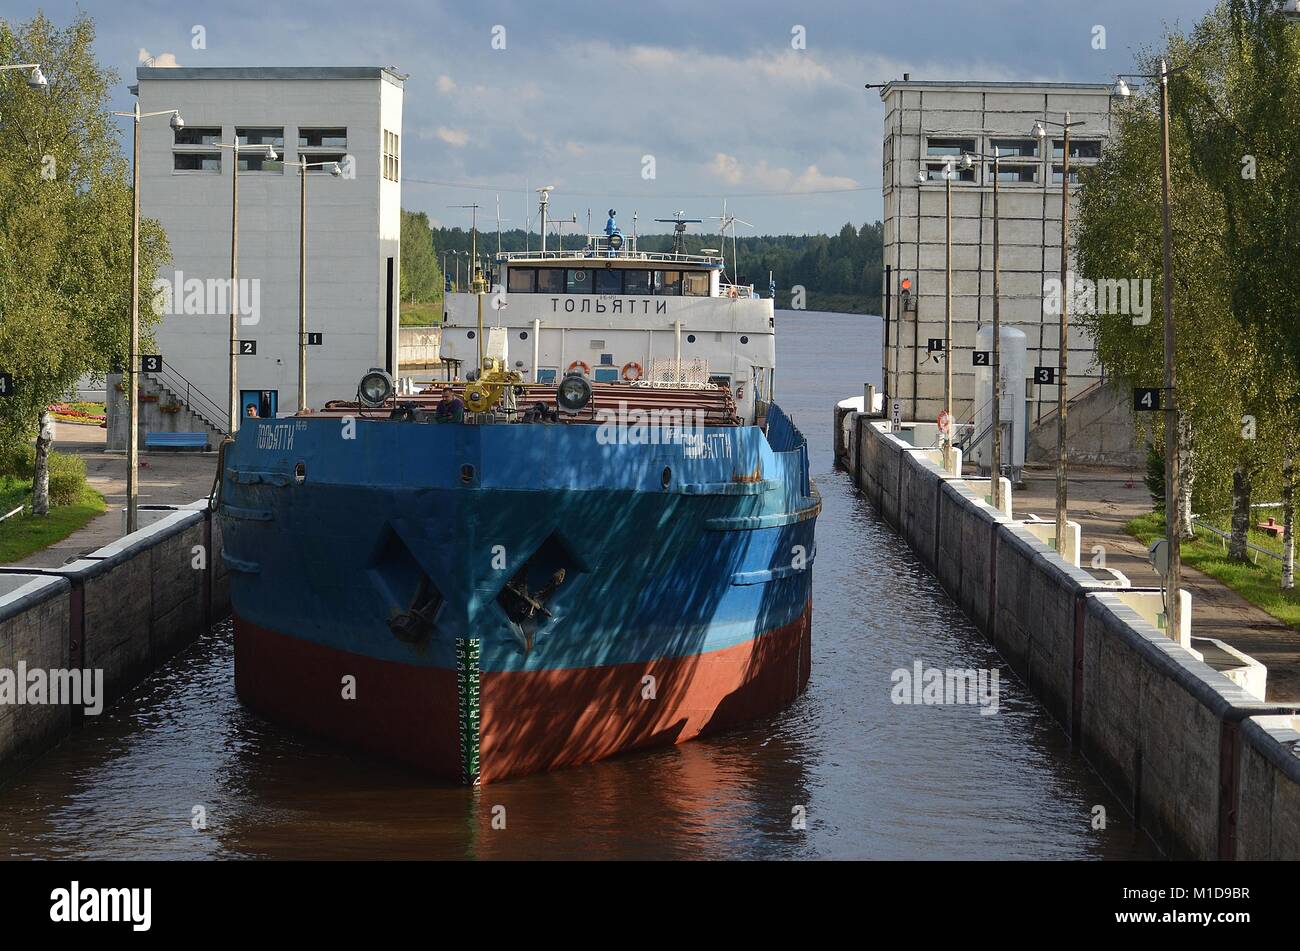 FREIGHTER 'TOLYATTI'  IN LOCK 1 ON THE KOVZHA RIVER BOUND FOR LAKE LADOGA, RUSSIA. Stock Photo